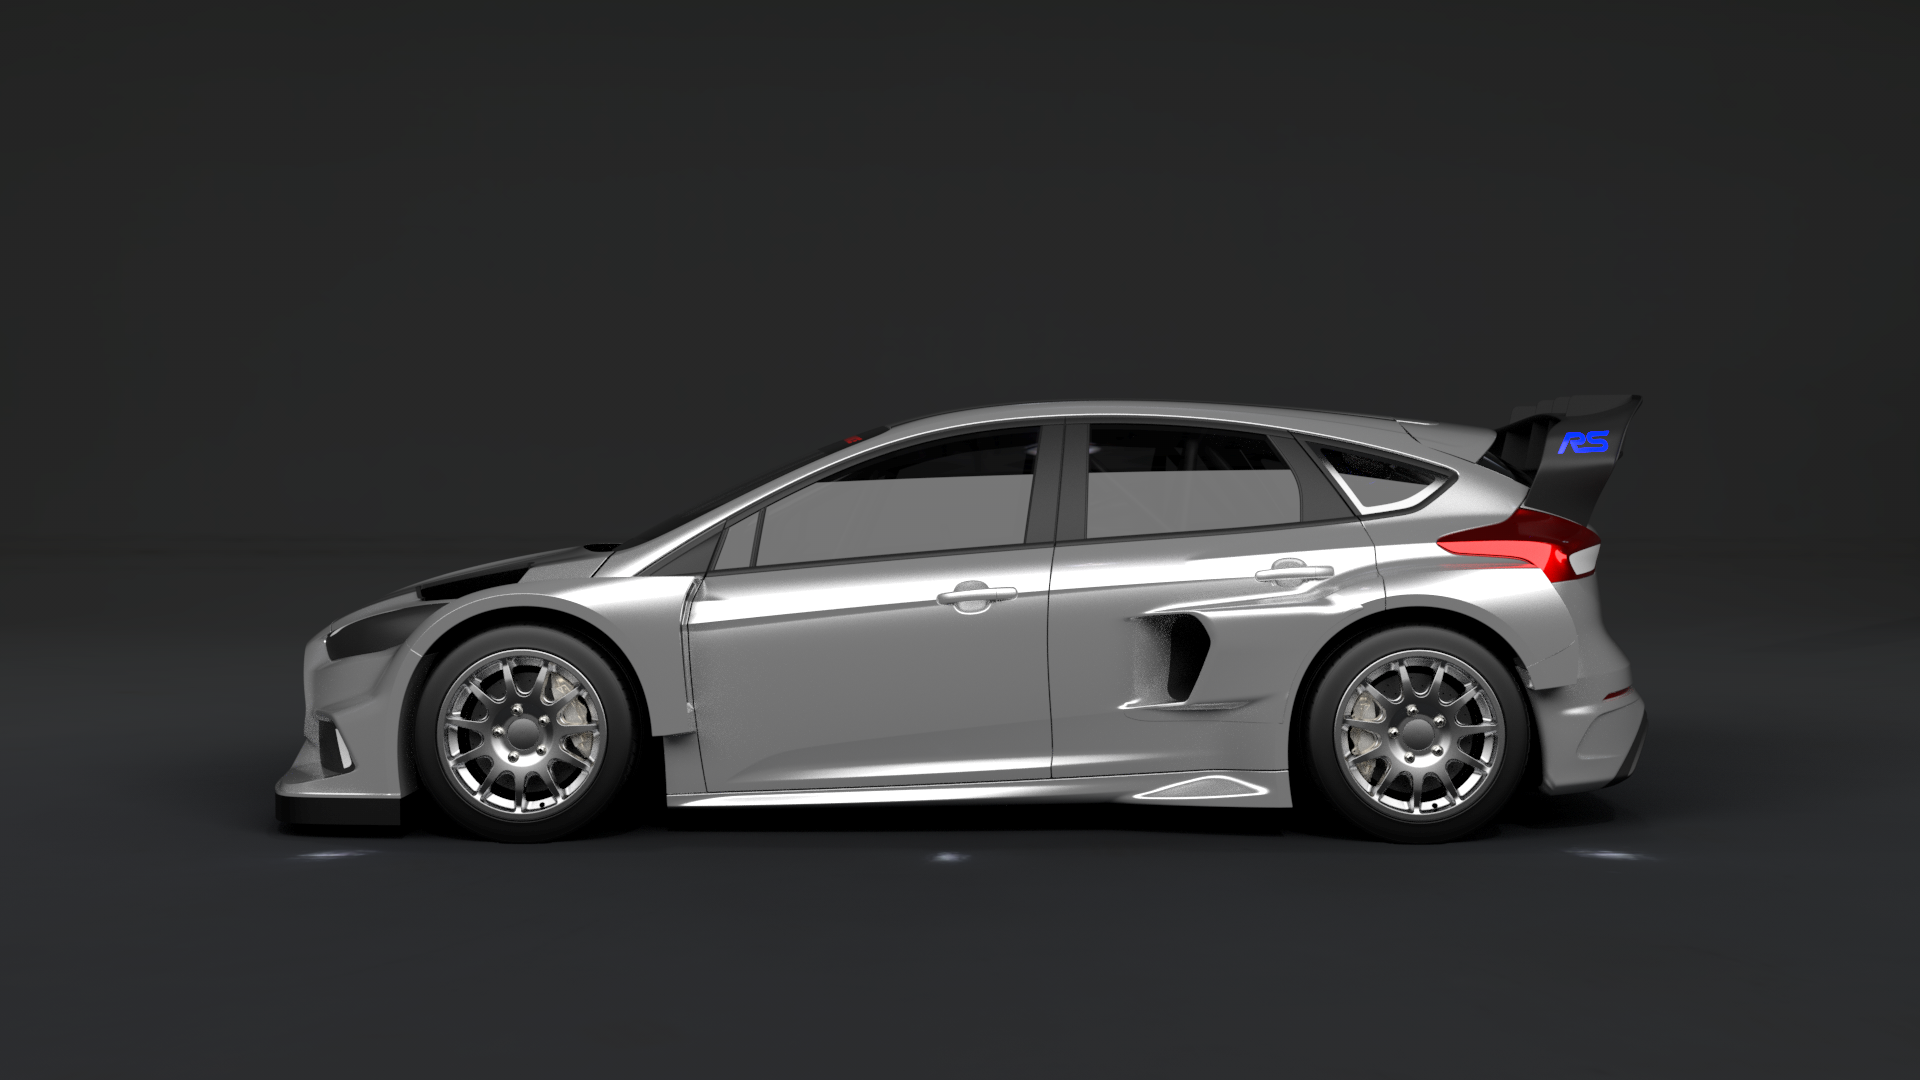 The Focus RS will Compete in FIA World Rallycross